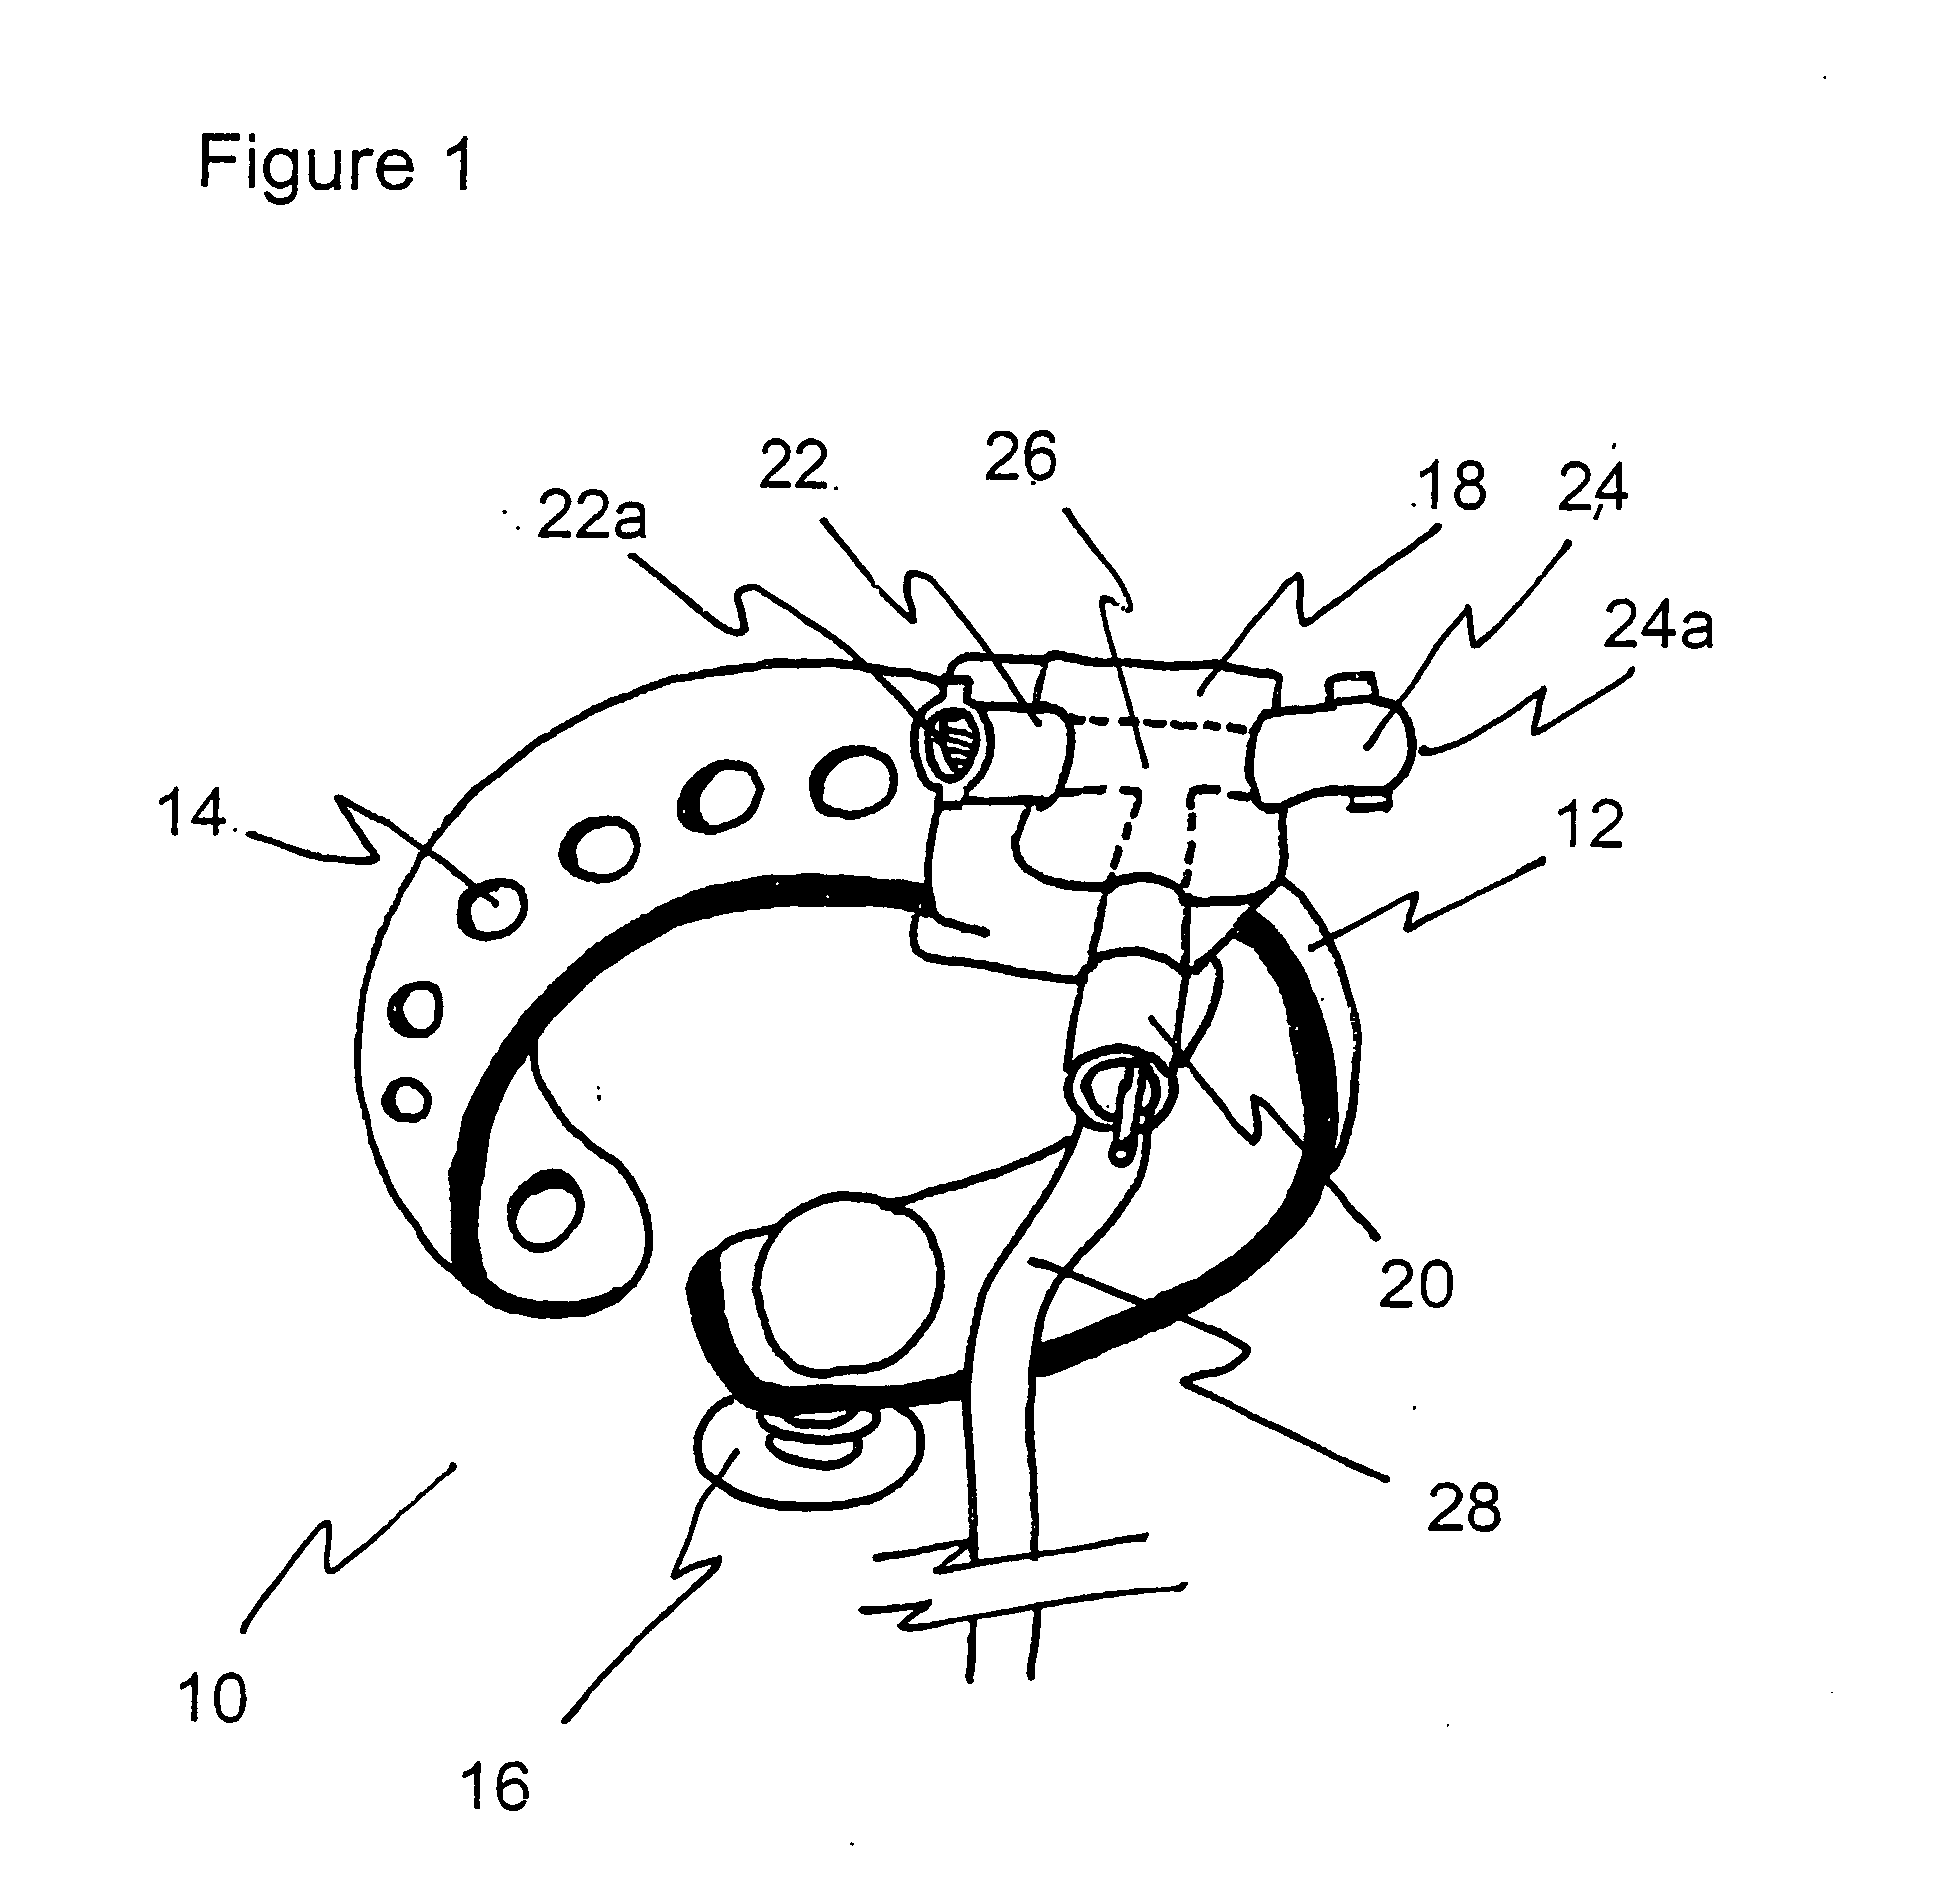 Multiport infusion device